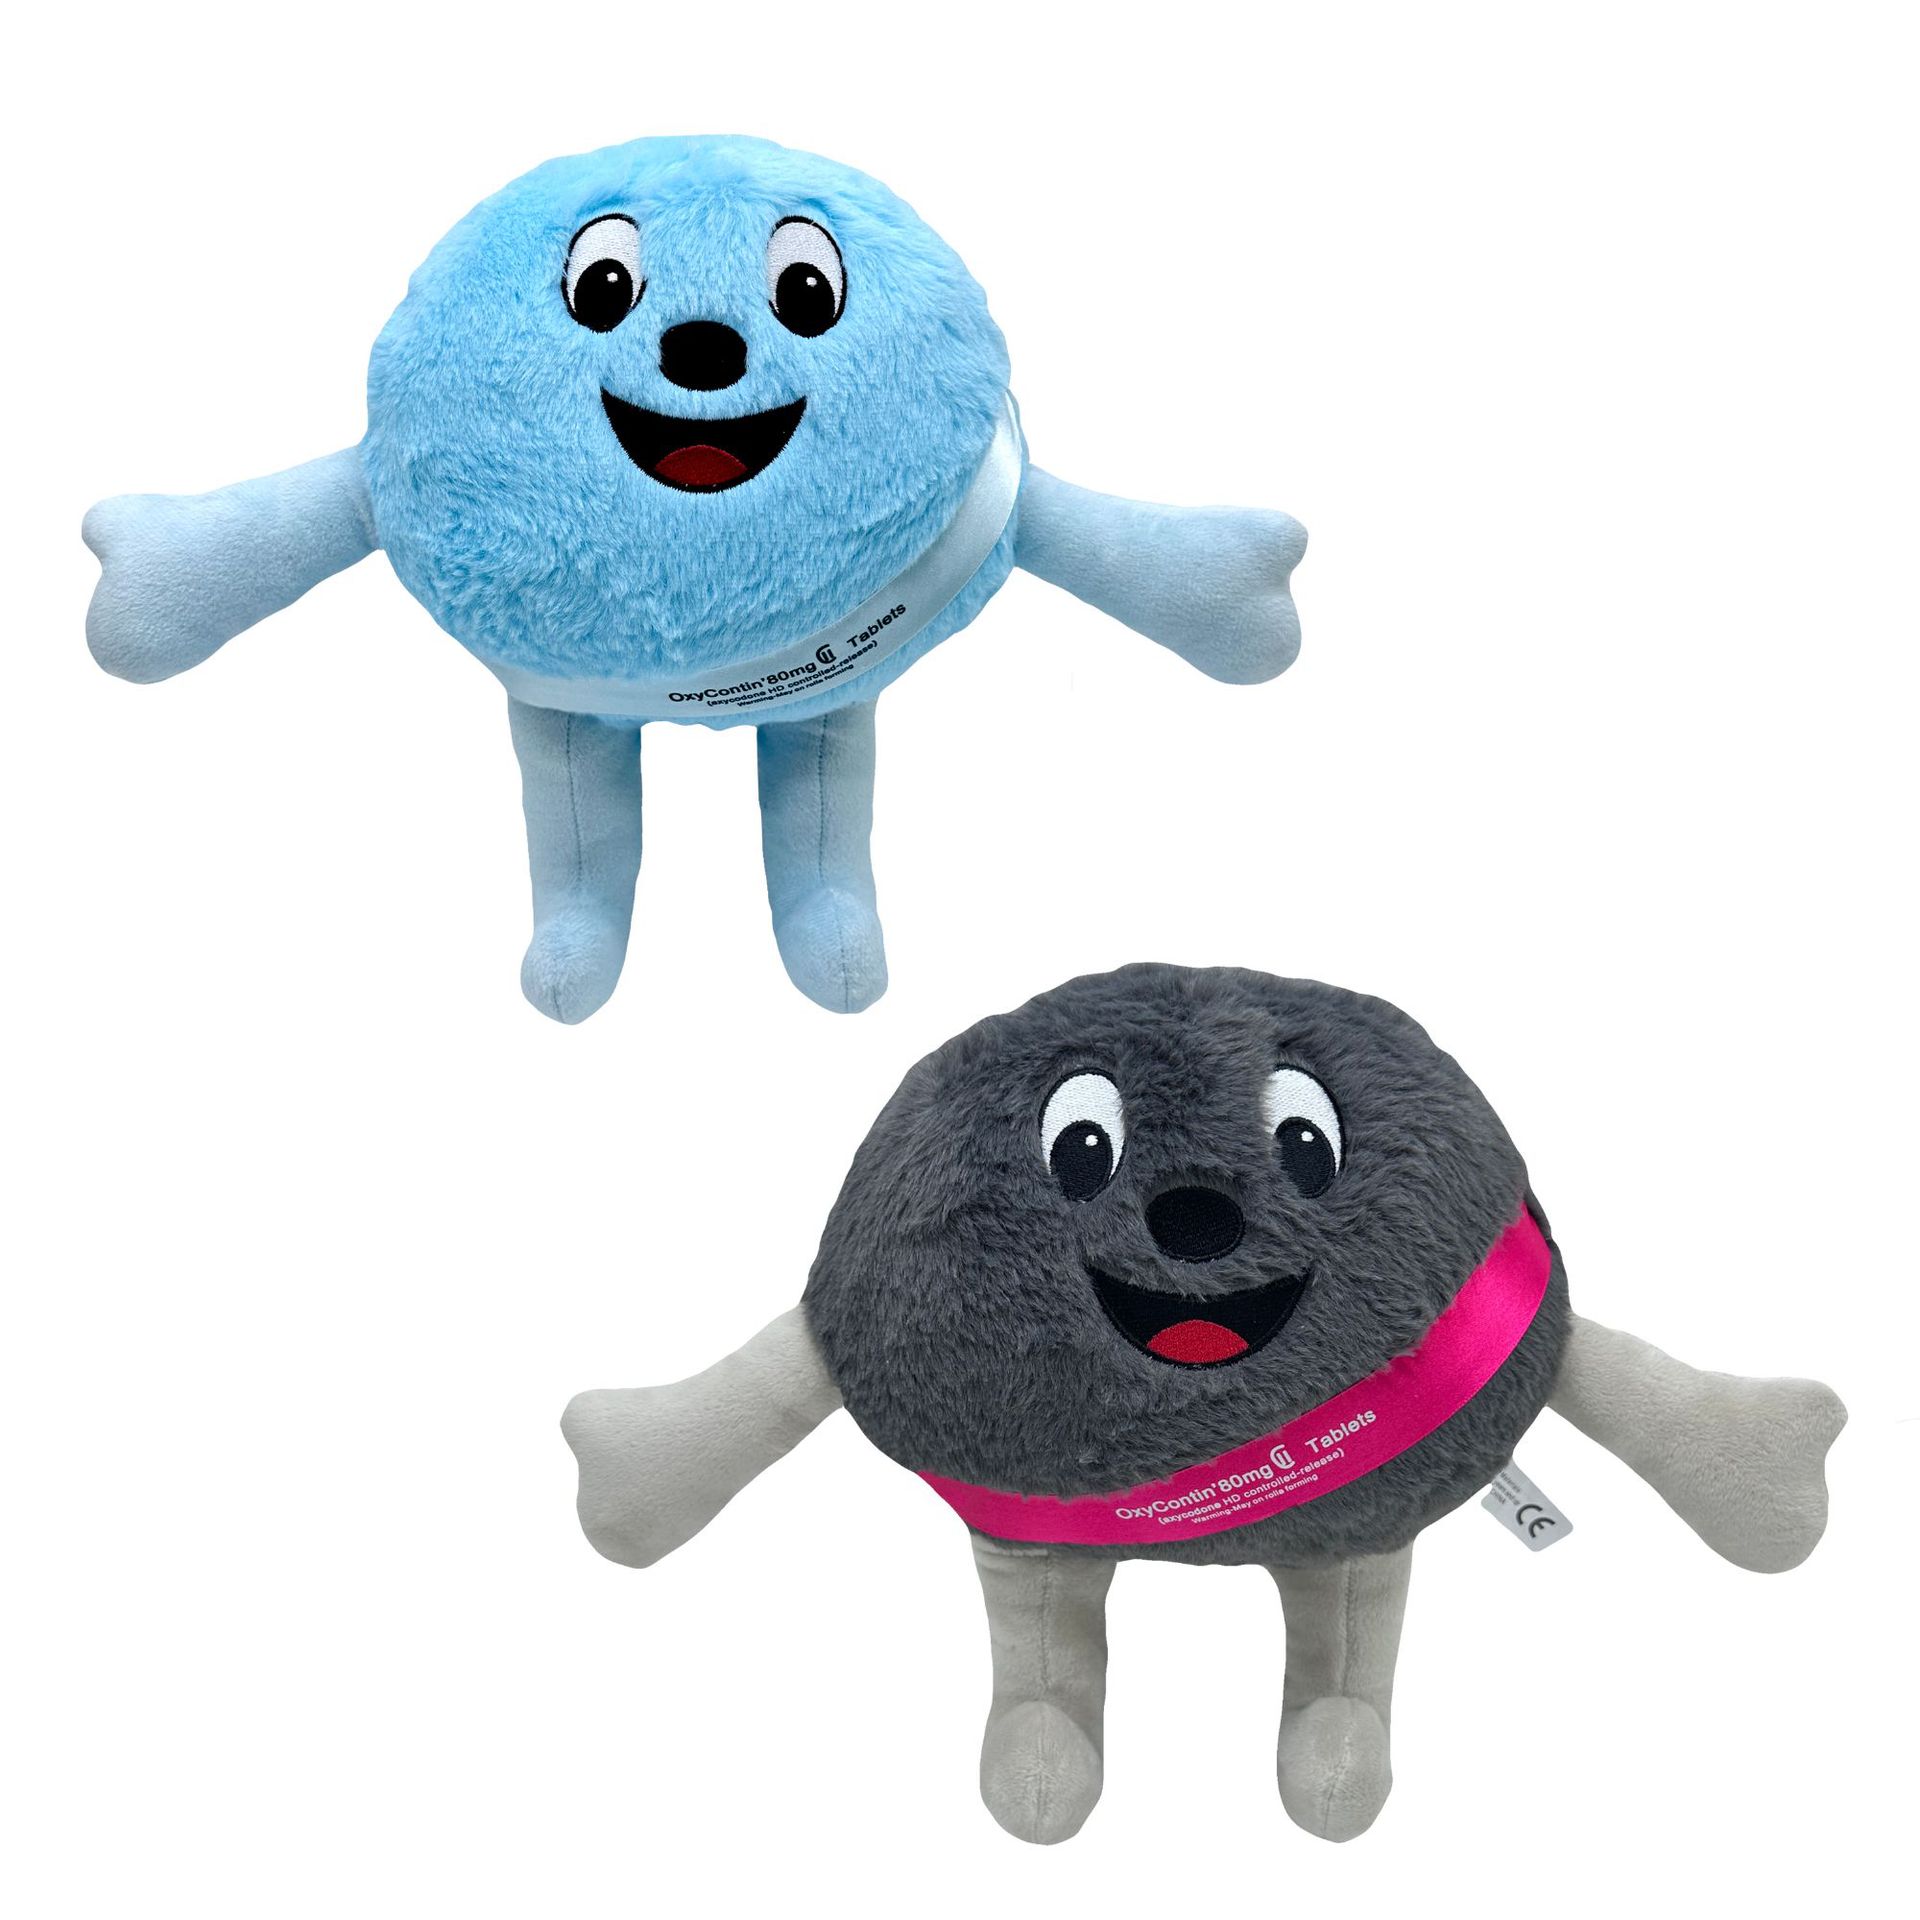 2023 YORTOOB Ball Plush Toy Cuddle Doll Gift for Kids Home Decorations